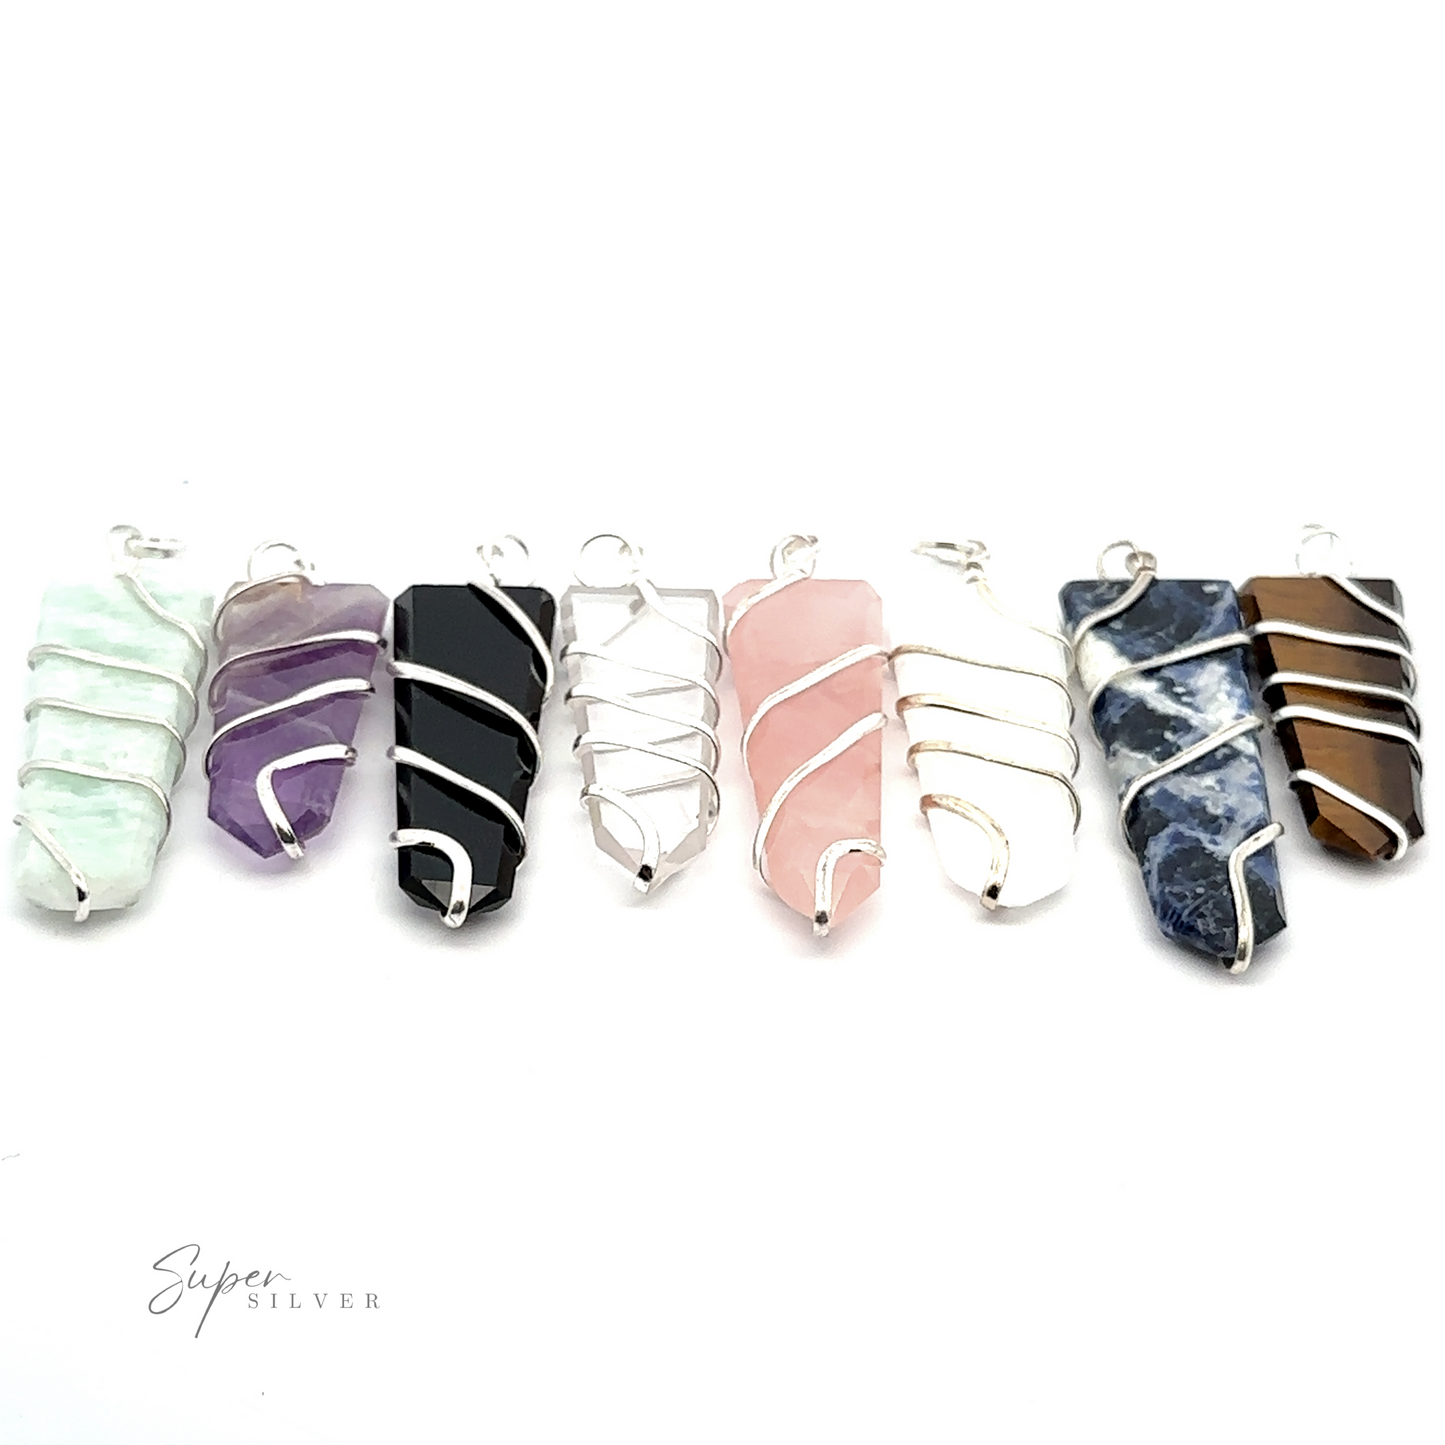 A row of seven stunning gemstone jewelry pieces wrapped in silver wire. These Wire Wrapped Slab Pendant showcase crystals of varying colors such as green, purple, black, pink, blue, and brown.